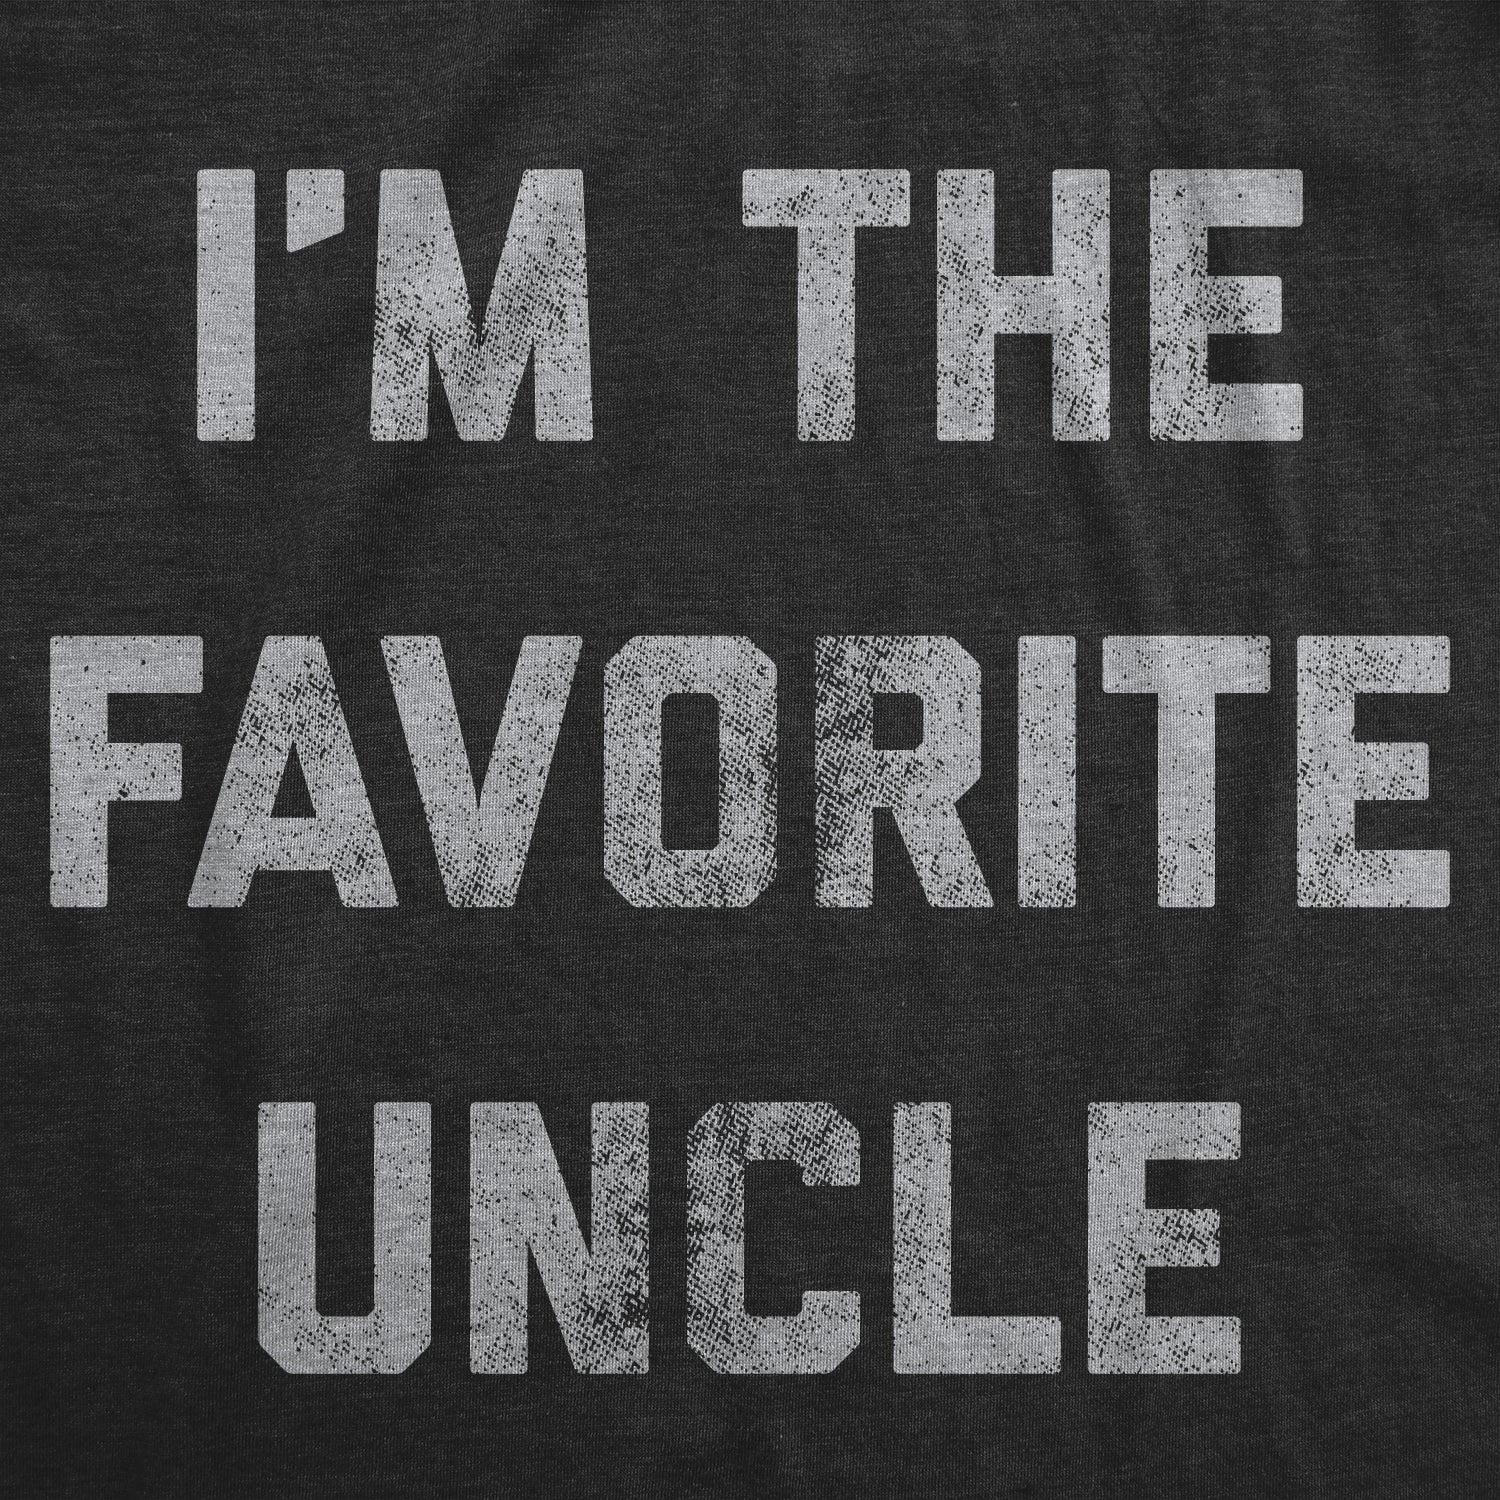 Funny Heather Black - Favorite Uncle I'm The Favorite Uncle Mens T Shirt Nerdy Uncle Tee